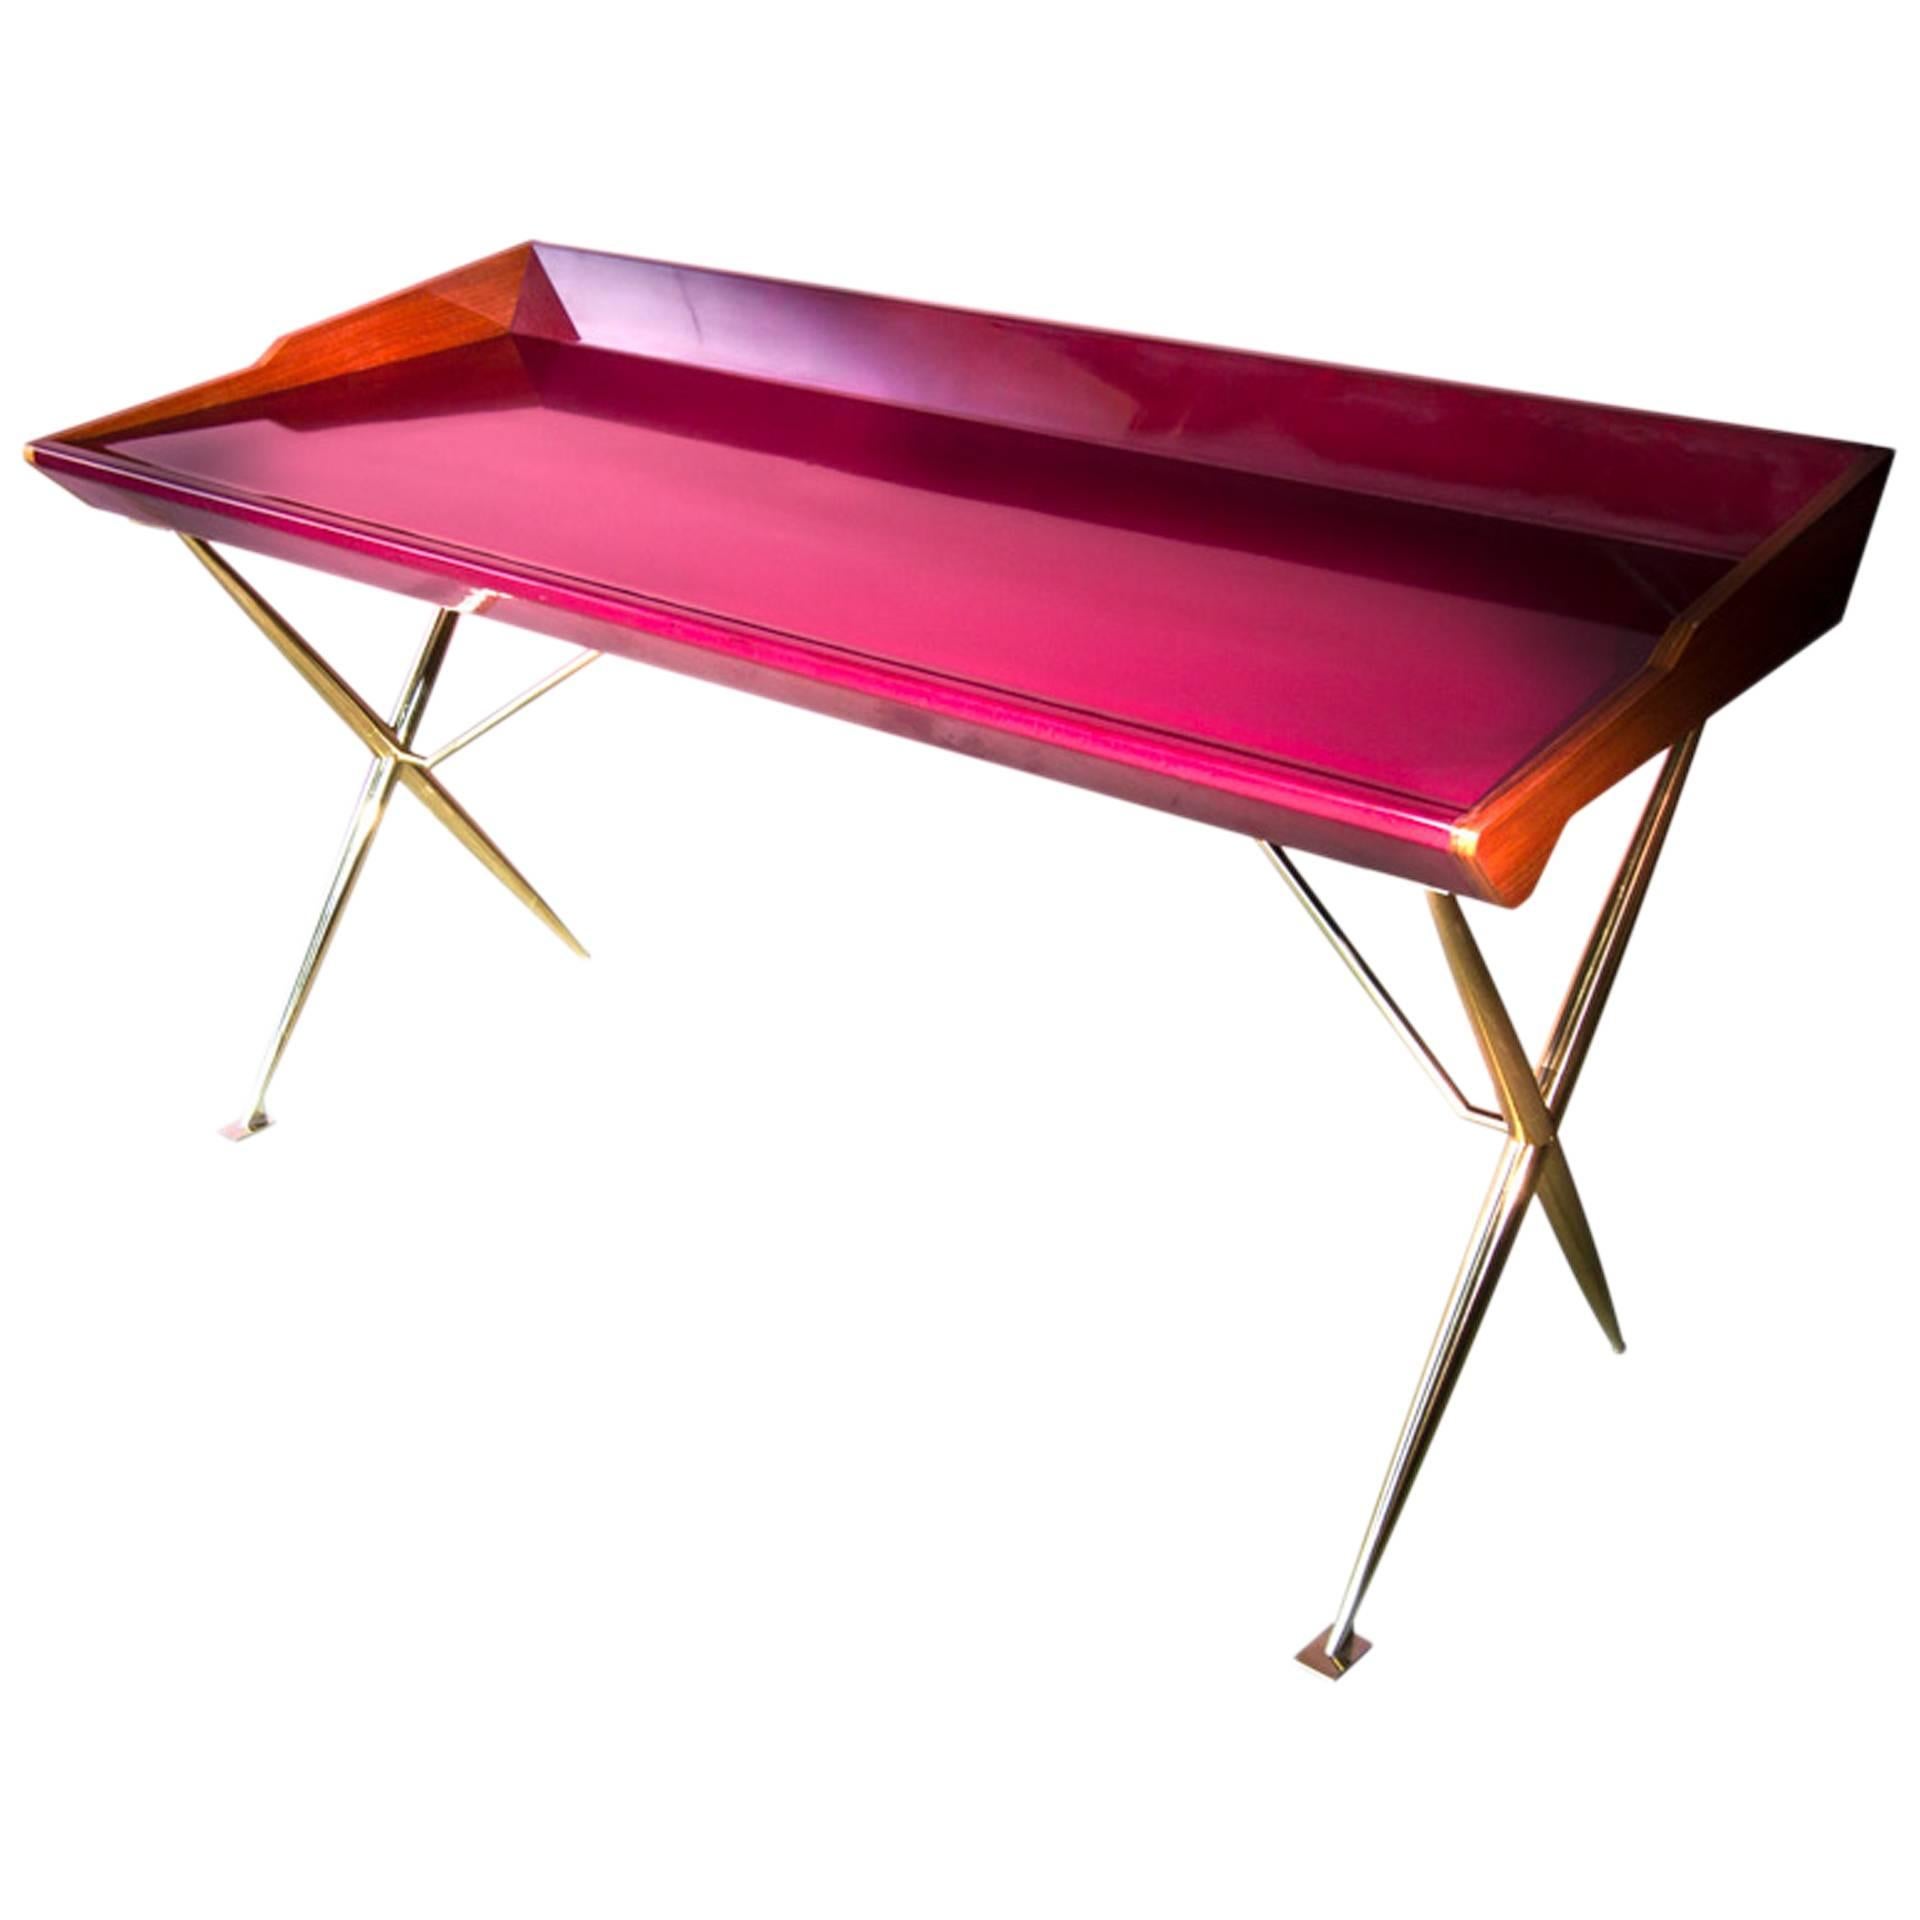 21st Century European Midcentury Inspired Lacquered Wood and Brass Writing Desk